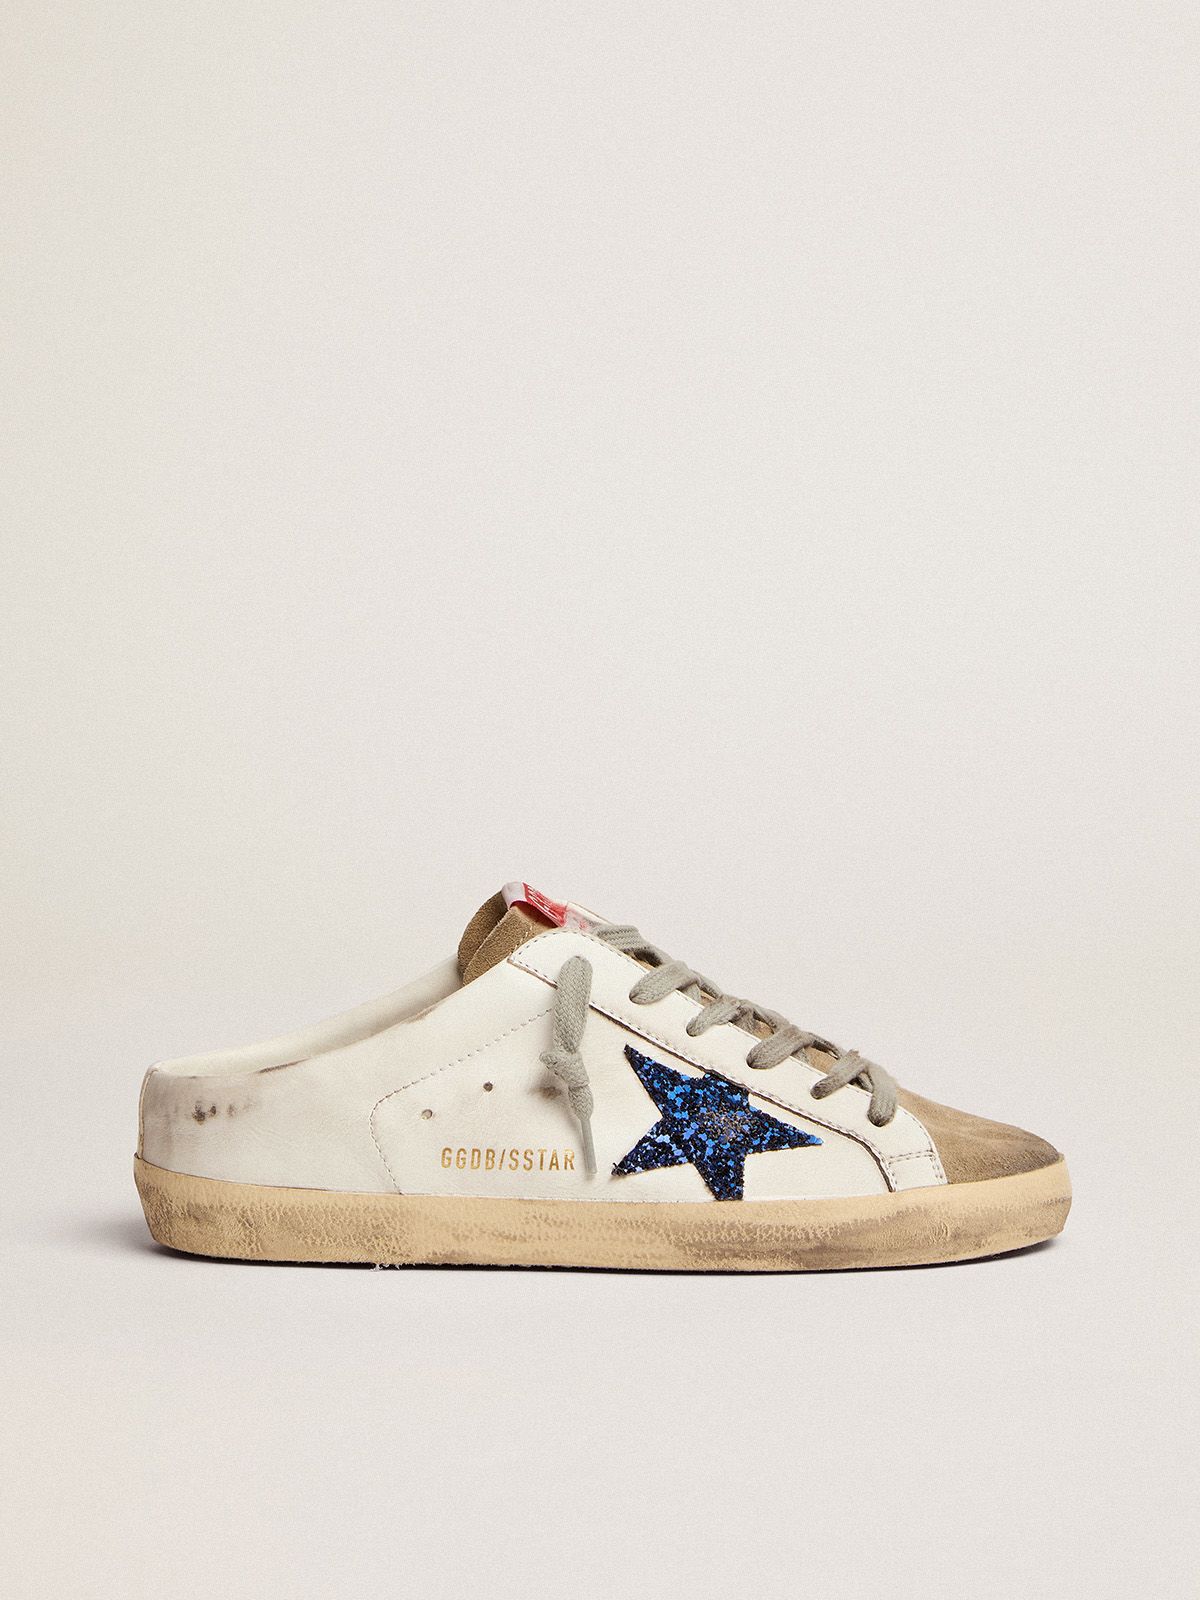 golden goose with Sabots leather Super-Star suede star glitter tongue in blue white and dove-gray